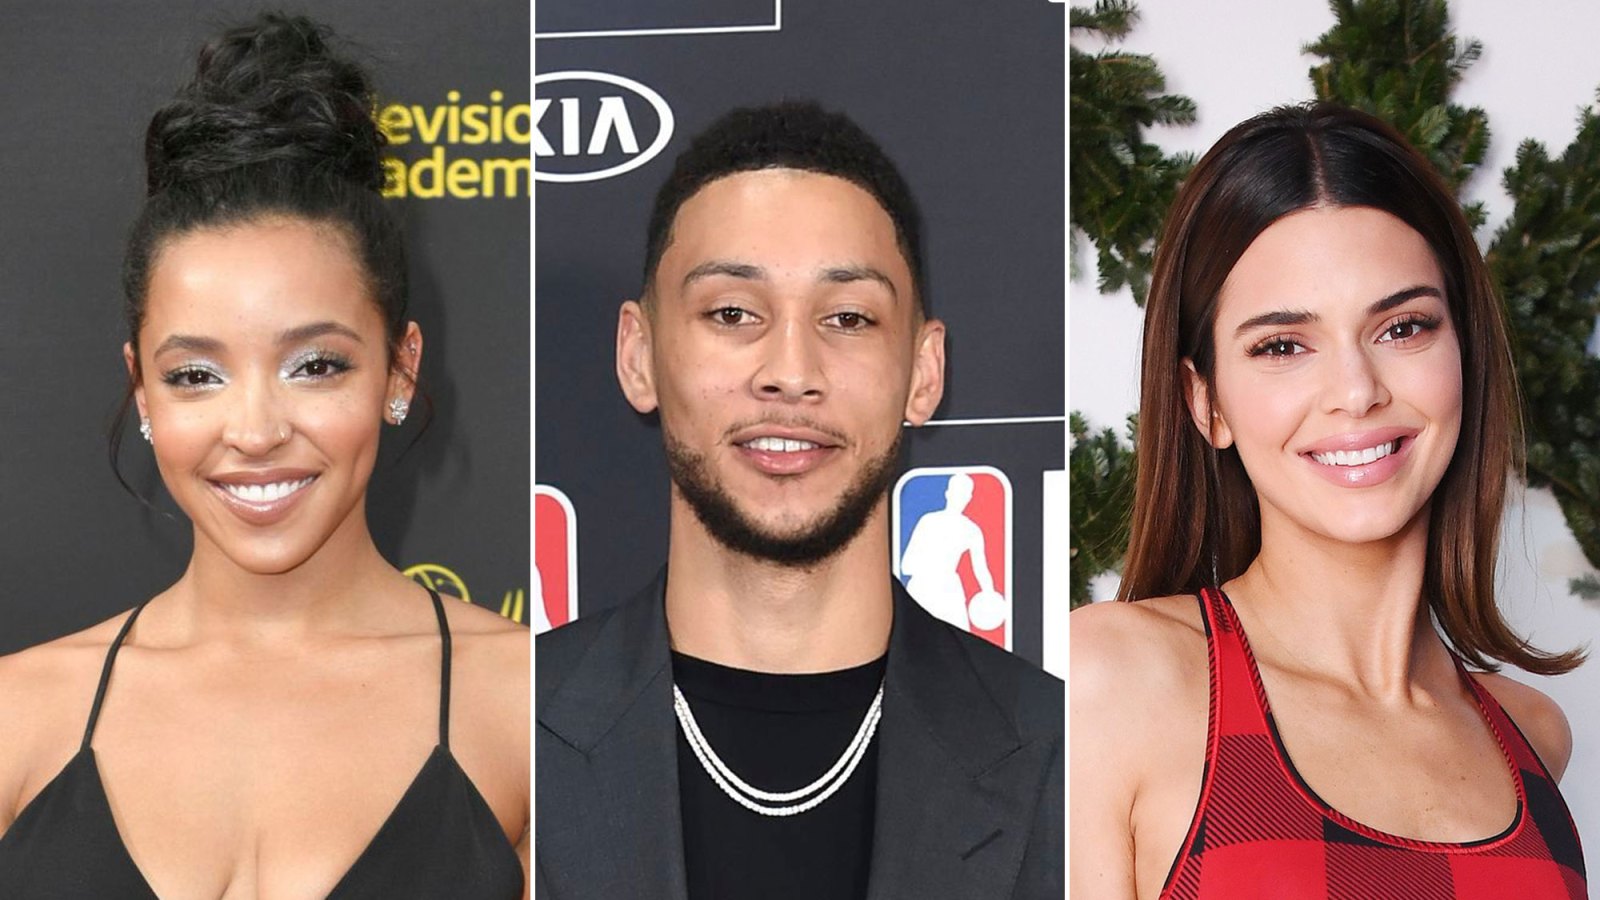 Ben Simmons 'called out' ex Tinashe and her 'flat out lie' that he texted  her inside club